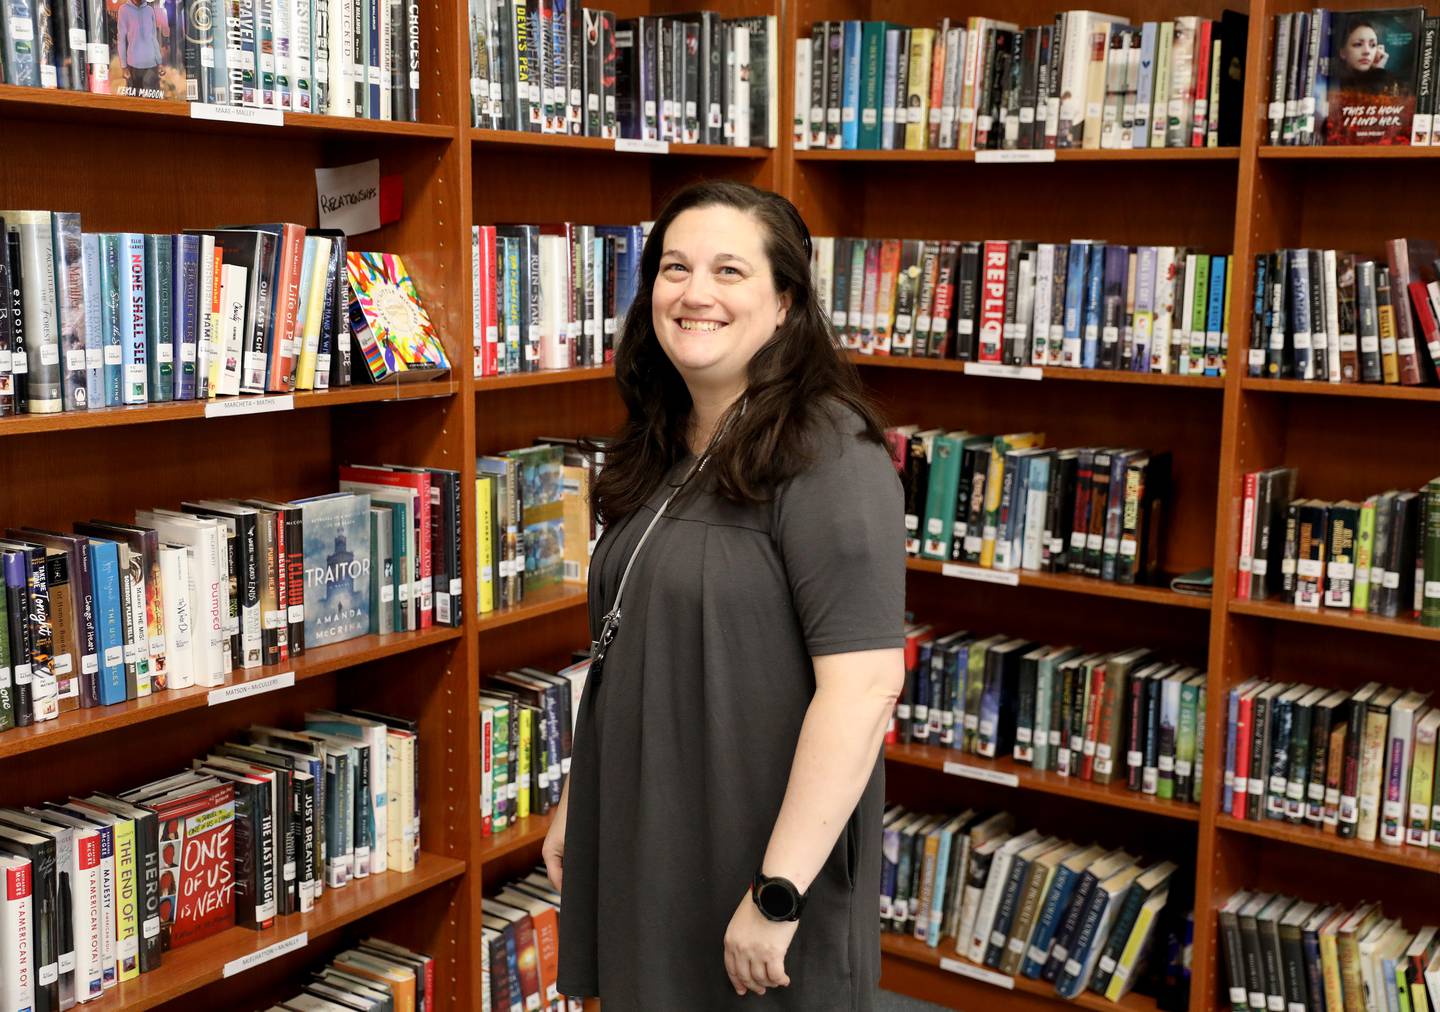 Kaneland High School media specialist Jessica Parker provides homework help and a calming environment to busy students. Parker strives to make all students feel welcome at the Kaneland High School library, whether they need a quiet place to complete schoolwork or conduct research.